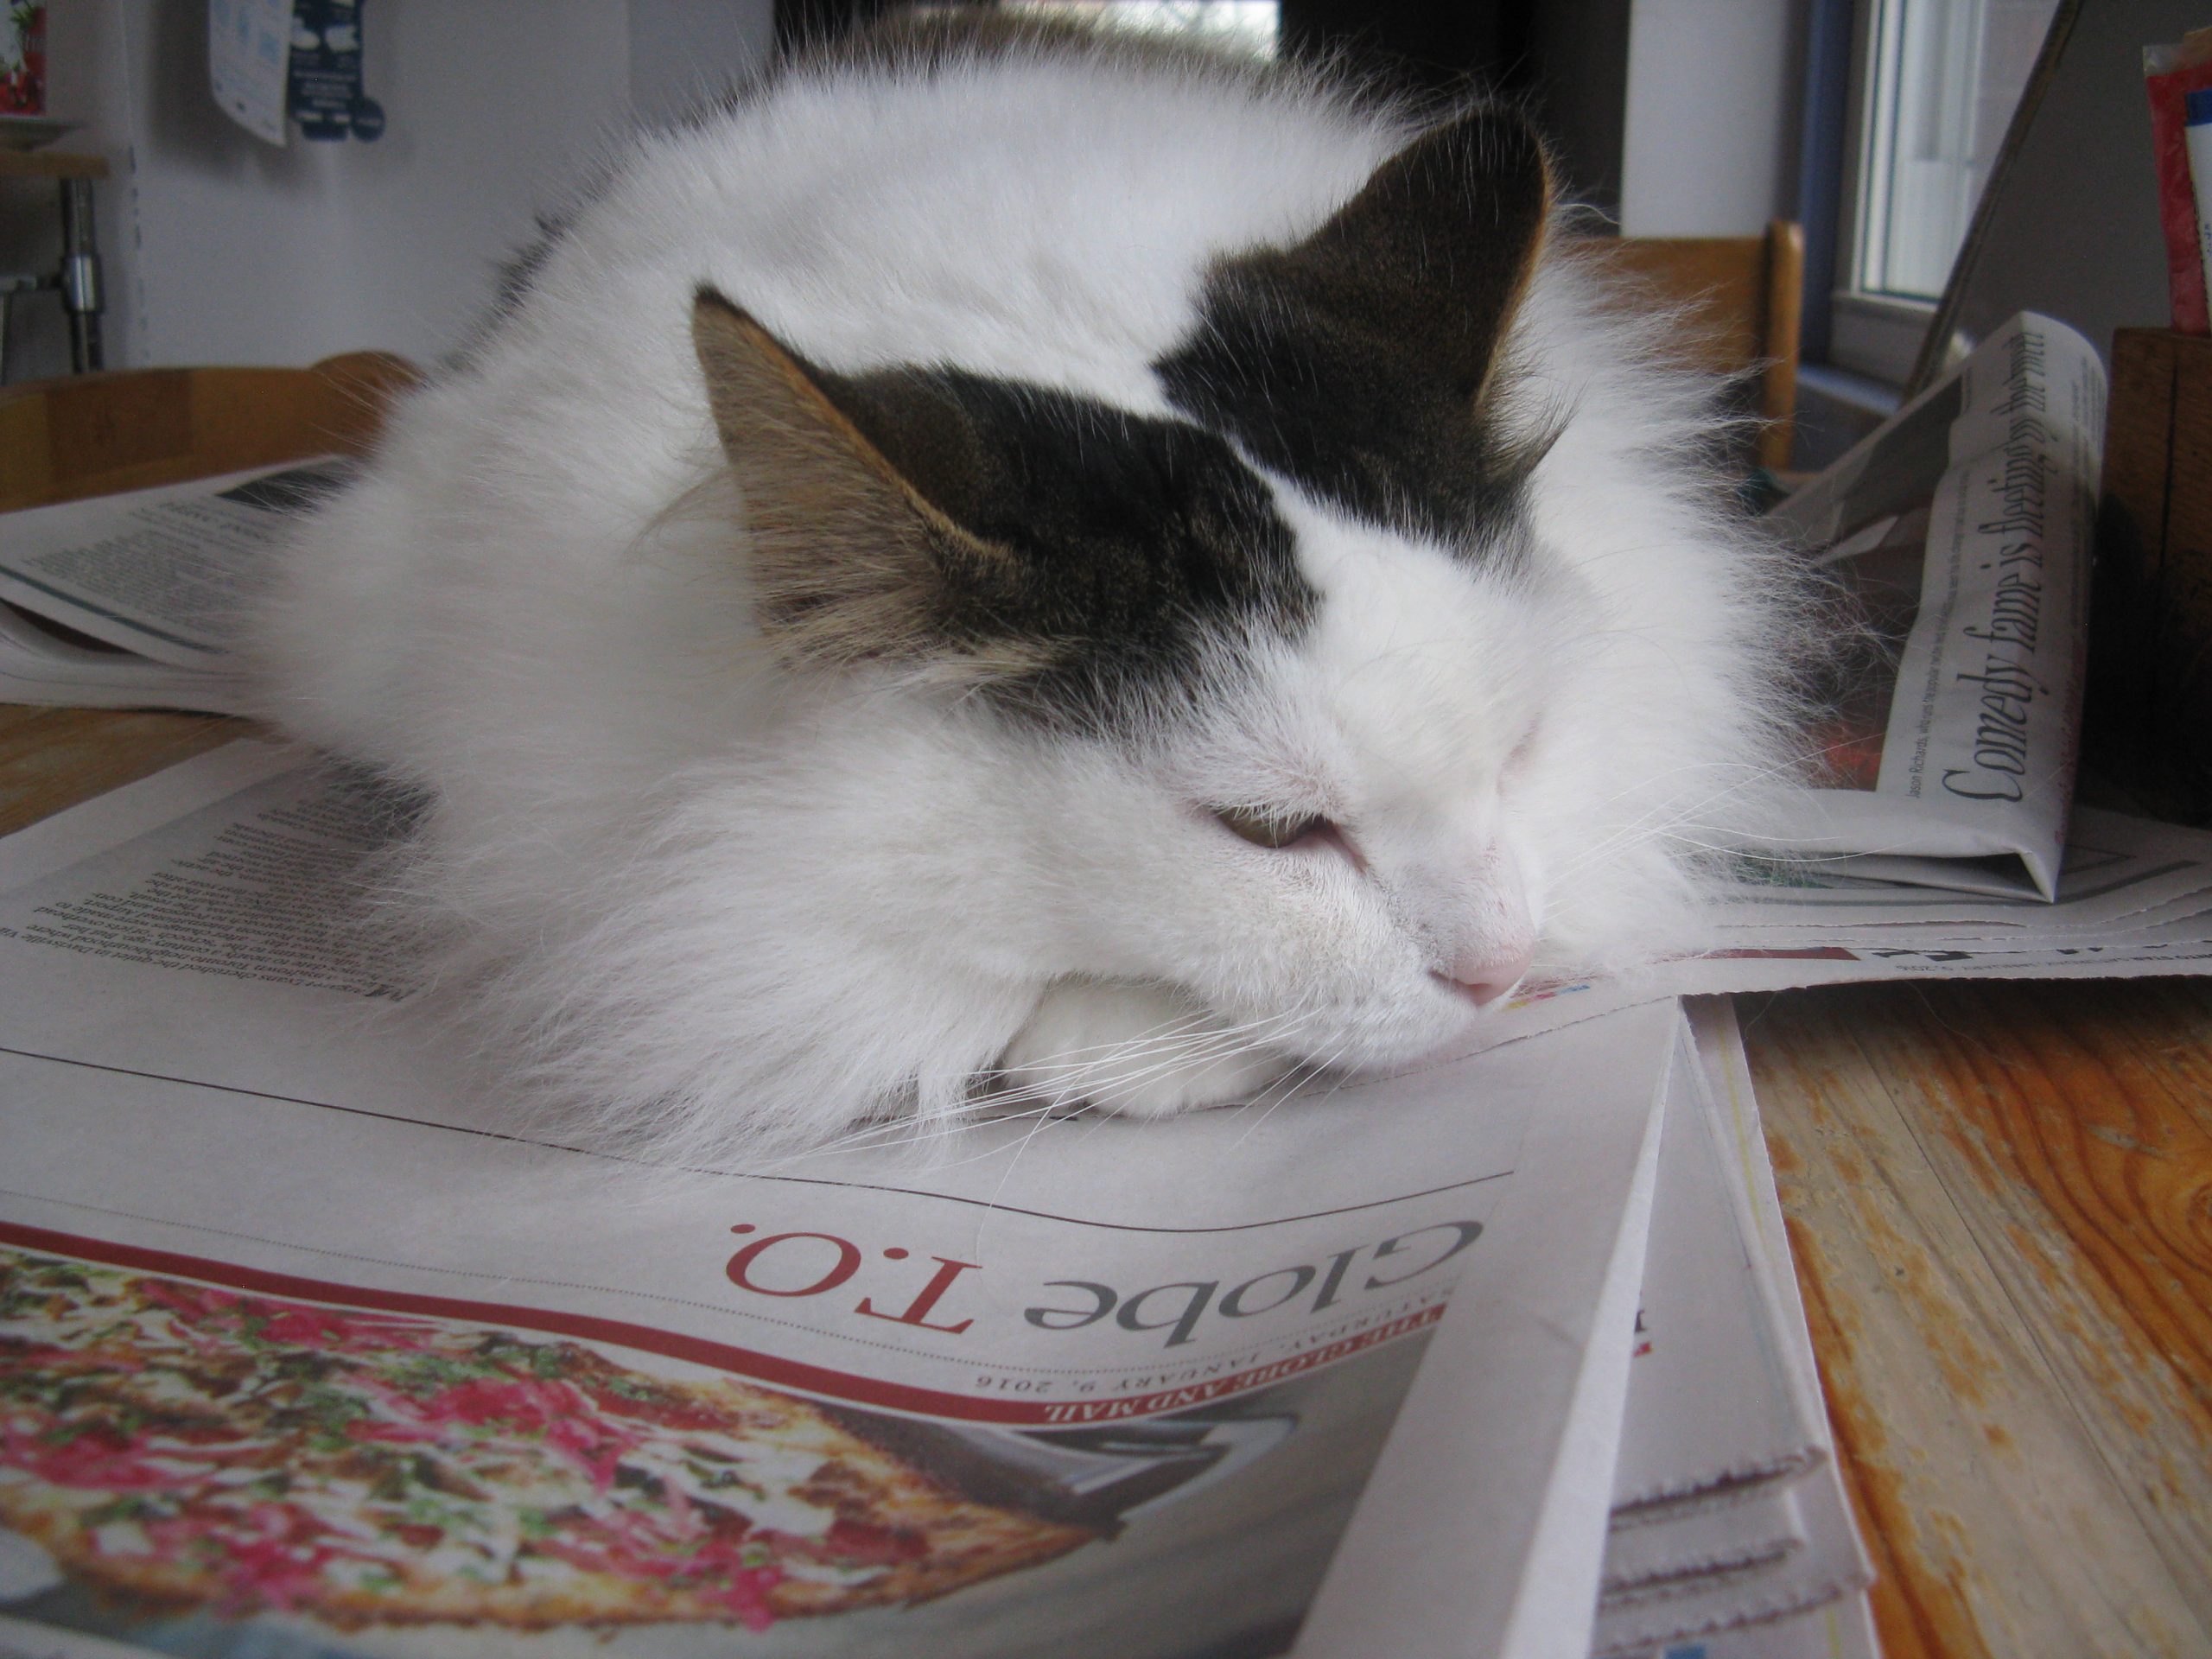 Black and white cat sleeps on top of a magazine.